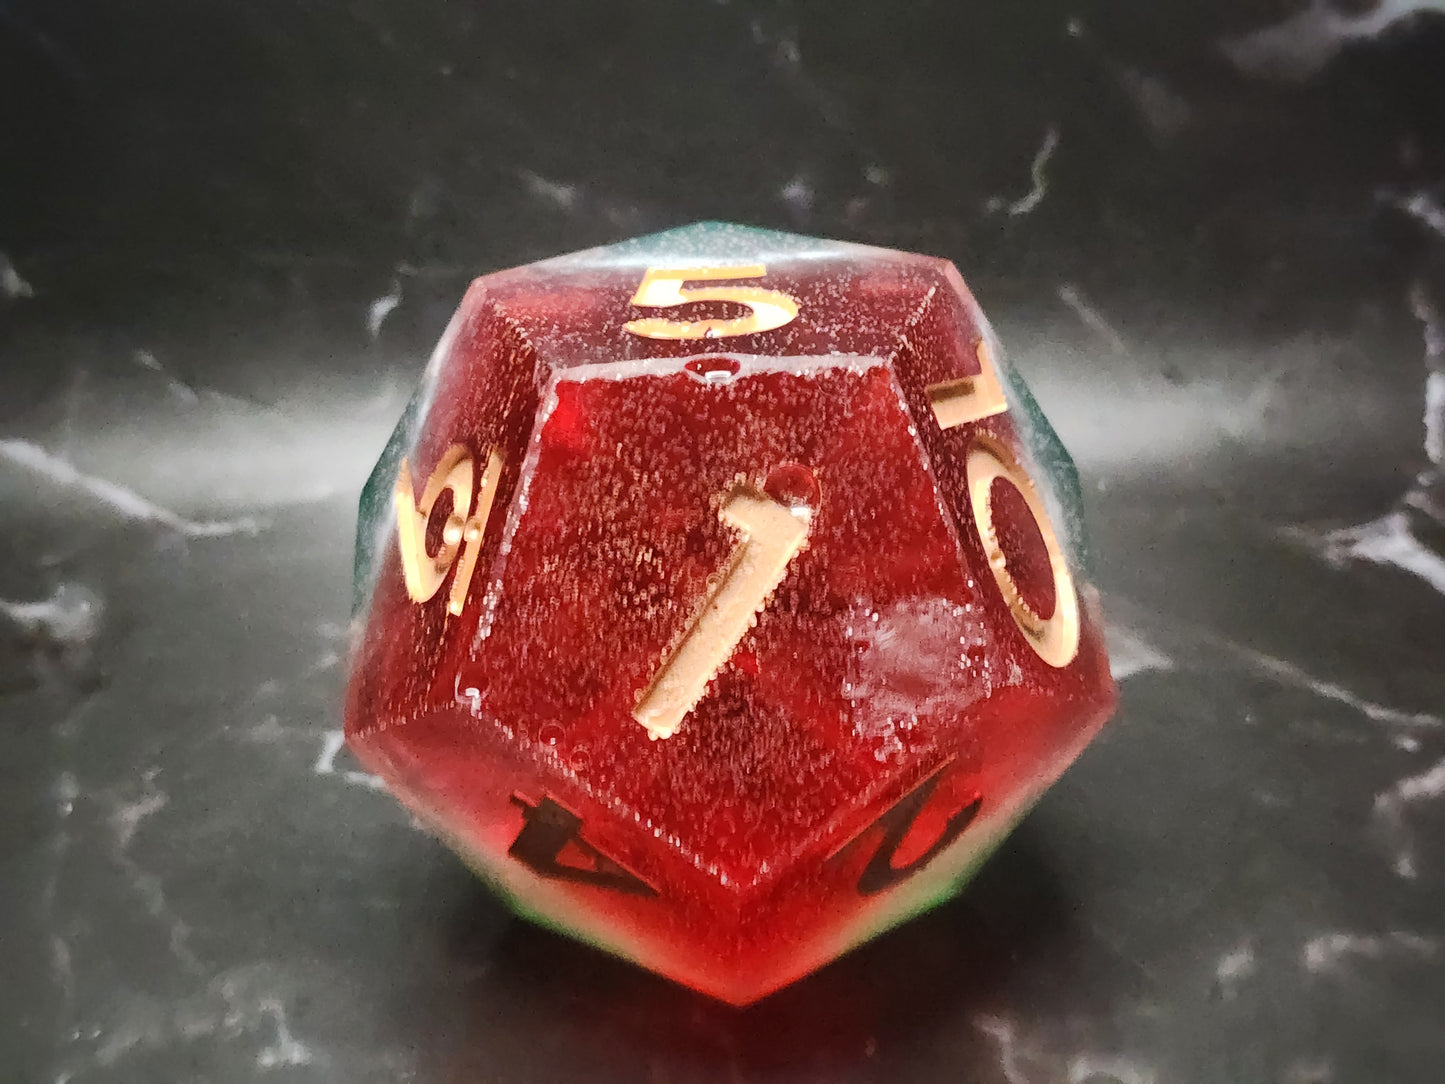 Red/Green/White D12 "Chonky"